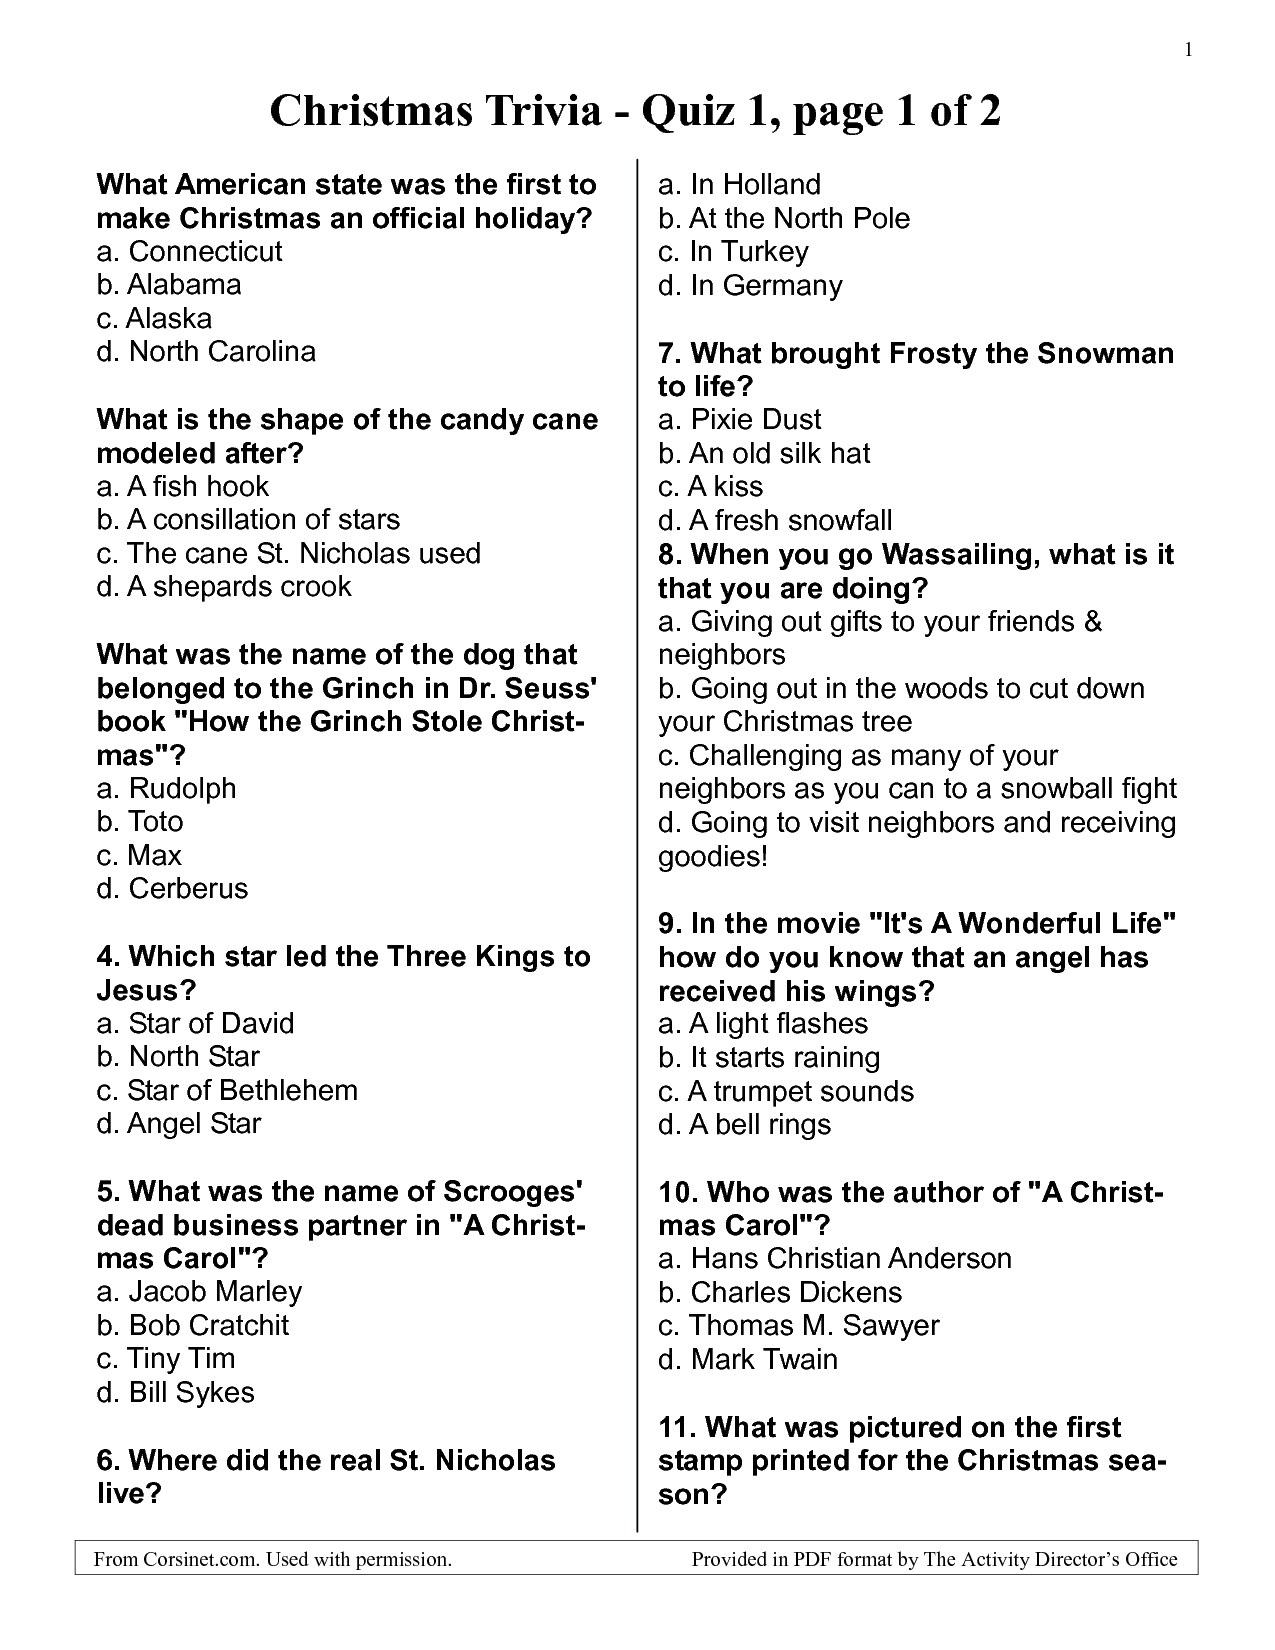 Free+Printable+Christmas+Trivia+Questions+And+Answers | Christmas - Free Printable Christmas Trivia Quiz